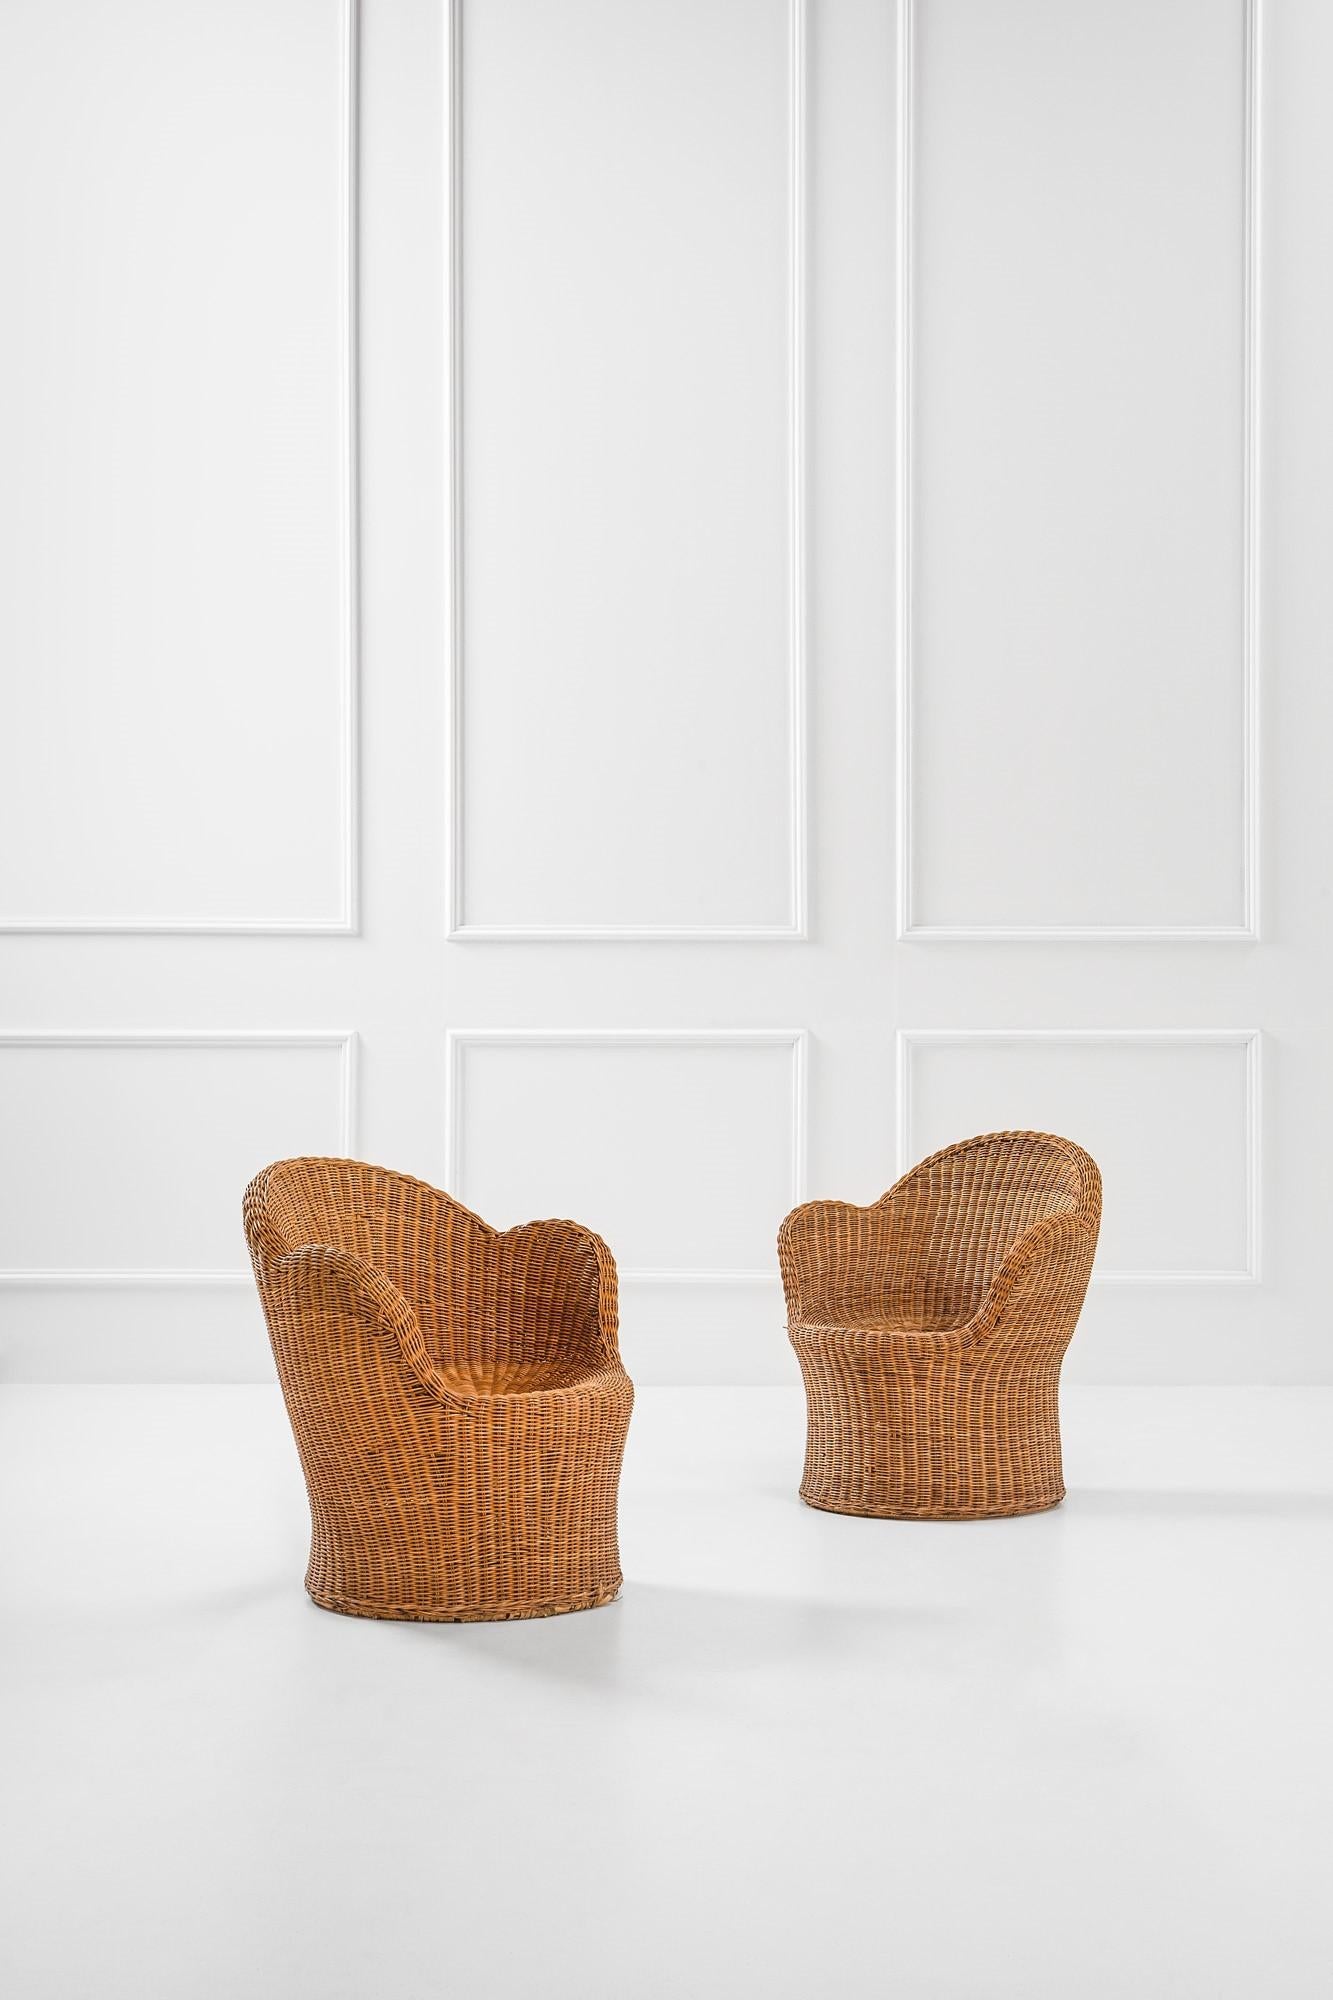 Pair of wicker armchairs by Vivai del Sud, 1970 (set of 2)
Made of wicker and rattan.
Dimensions 67L x 75H x 63D cm
Production: Vivai del Sud, circa 1970.